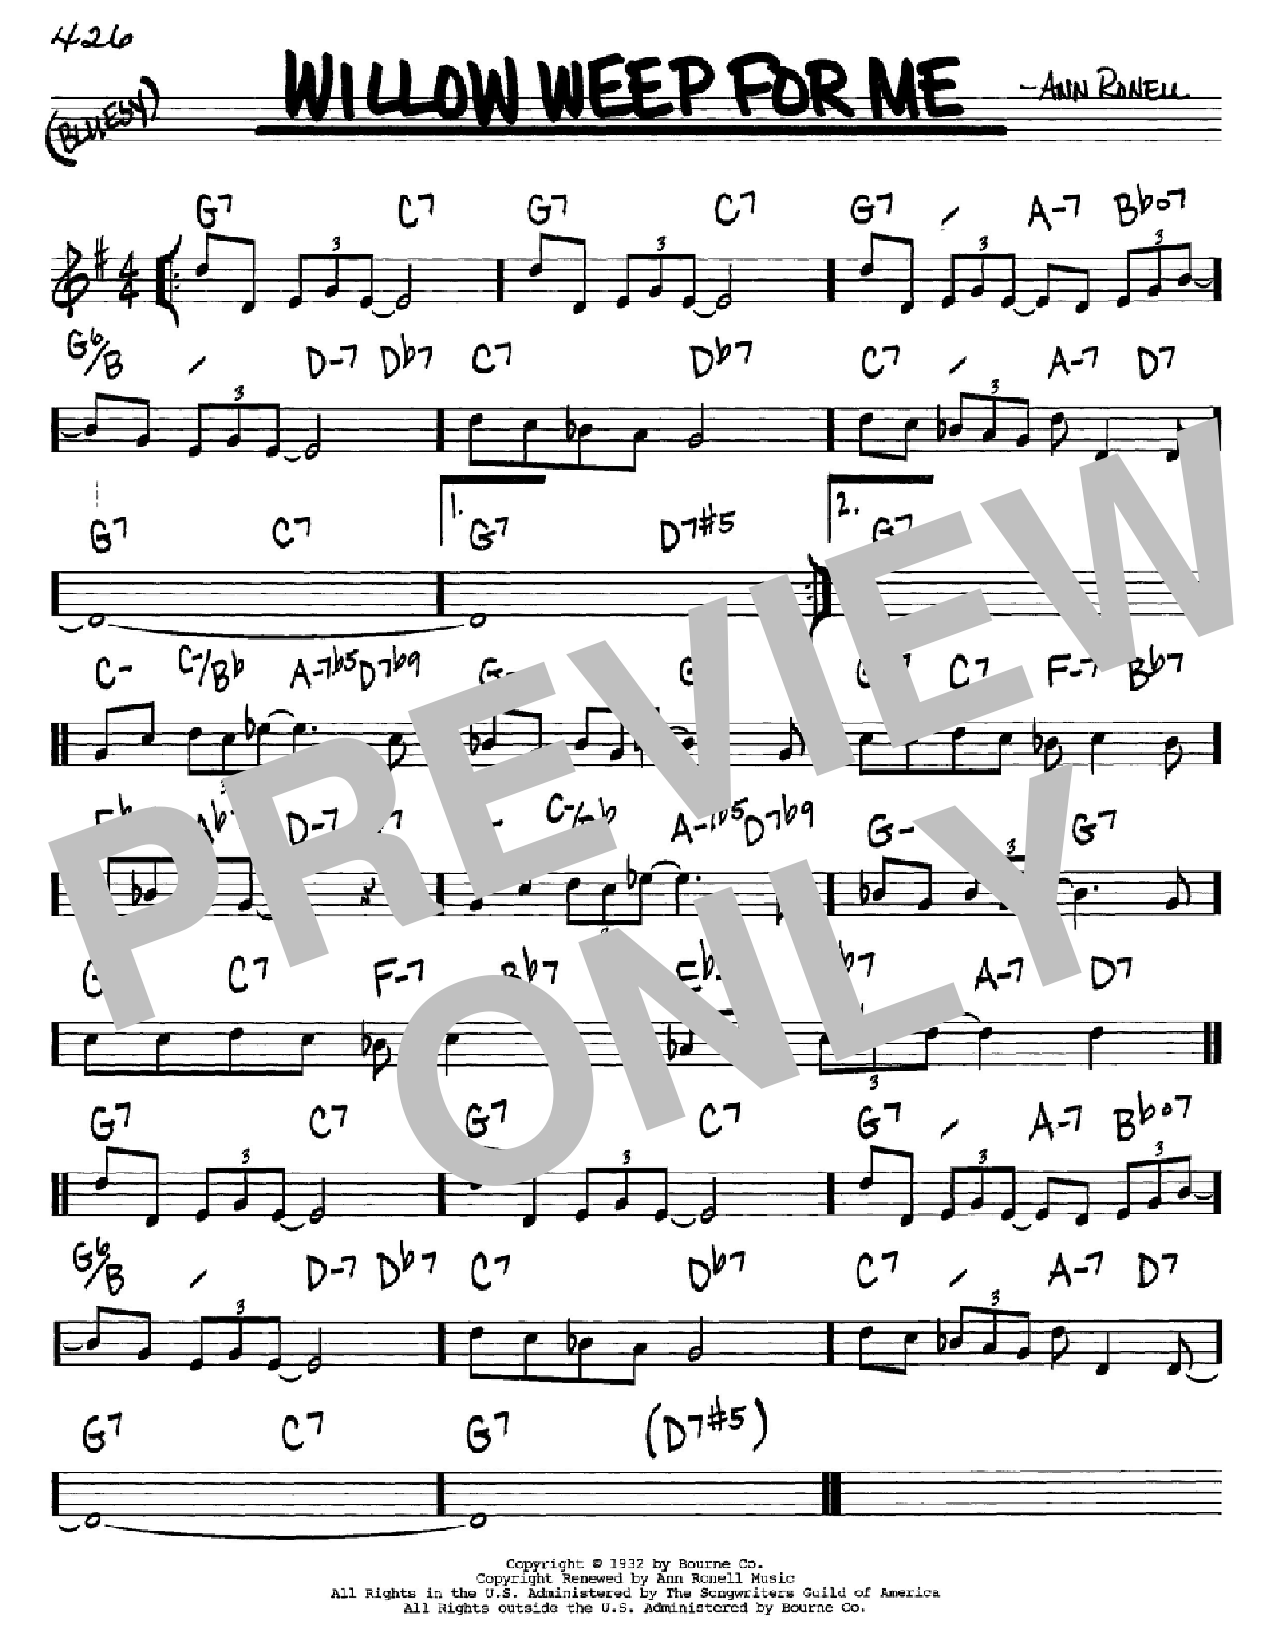 Download Chad & Jeremy Willow Weep For Me Sheet Music